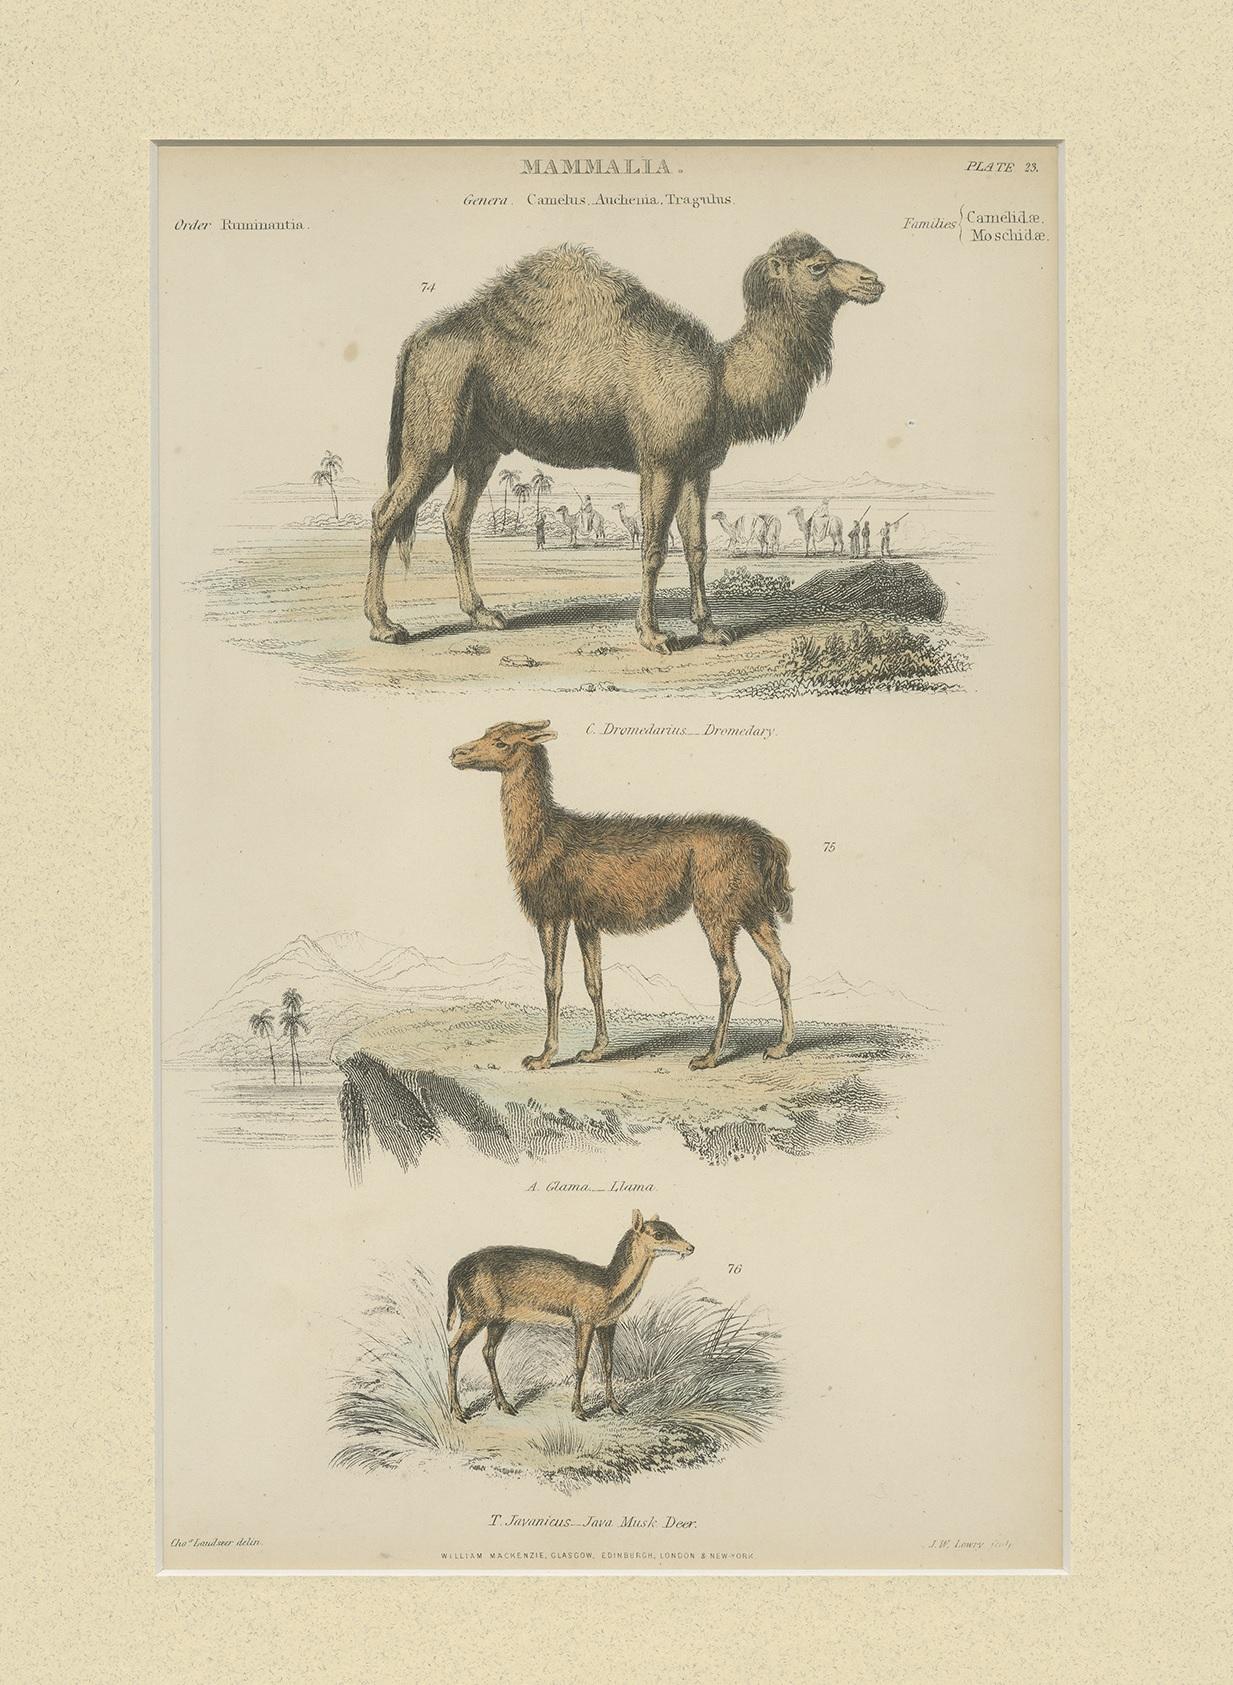 Antique print titled 'Mammalia'. Print of a dromedary, lama and Java musk deer. This print originates from 'The Museum of Natural History' by John Richardson. Published by William Mackenzie.

Passepartout included.